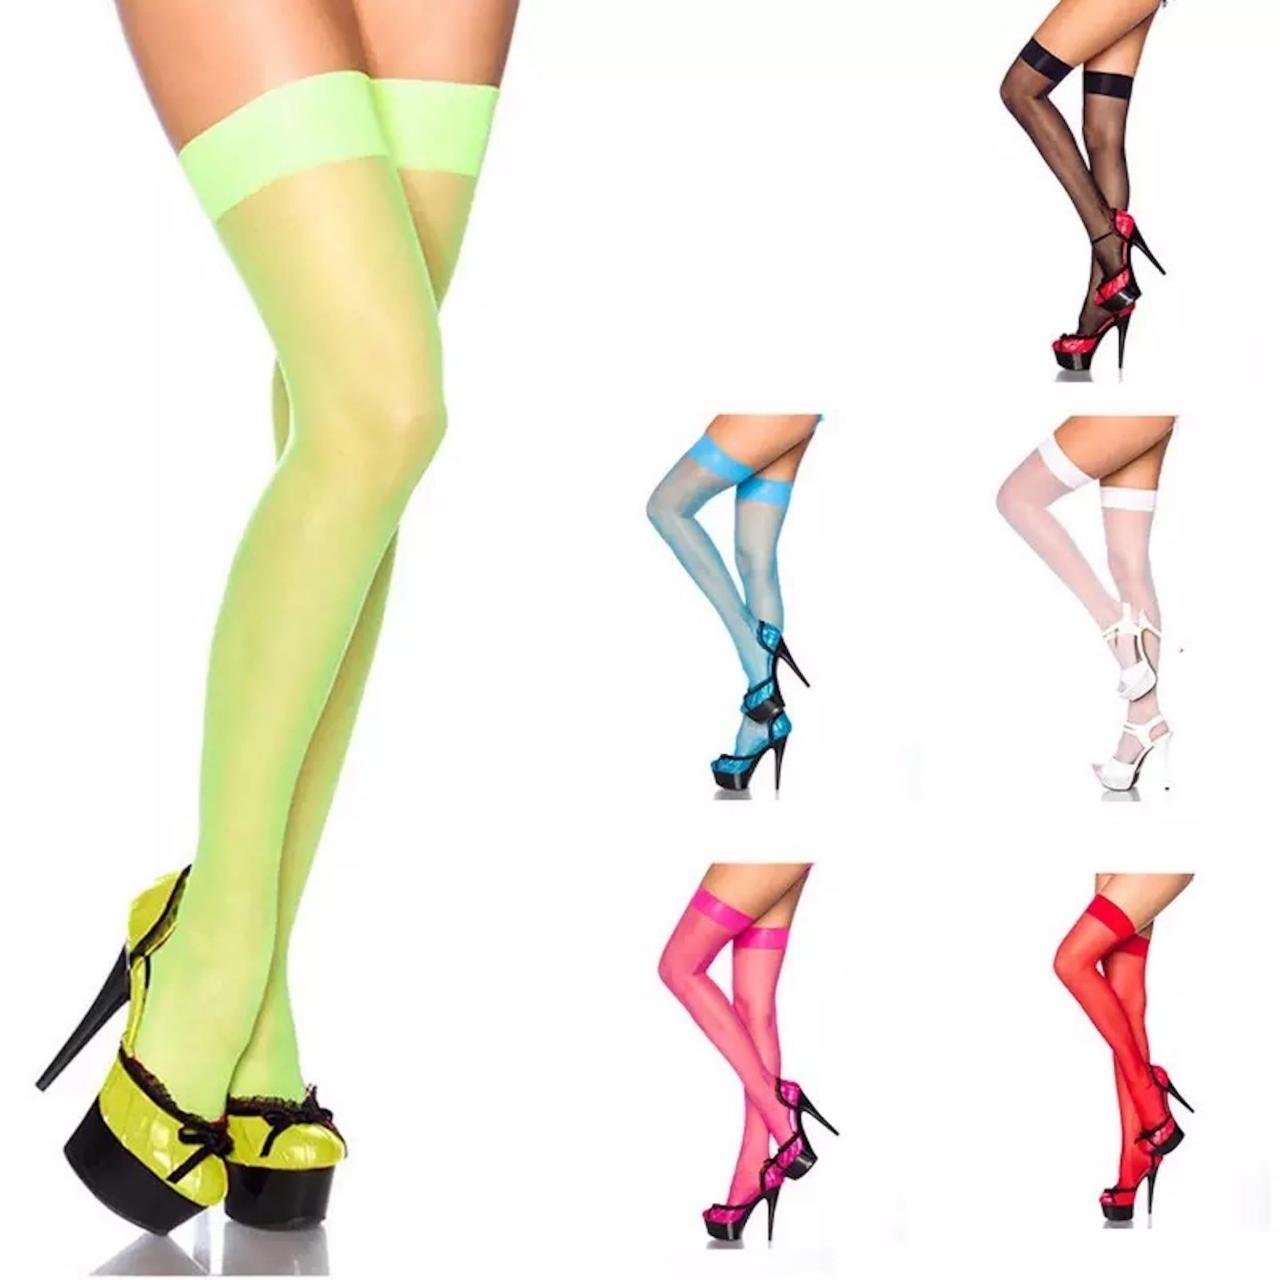 Nylon Stockings For Women Without Garter Belt / Sexy Multi Color Nylon Stockings / Green Red White And Black Stockings Flash Color / Evening